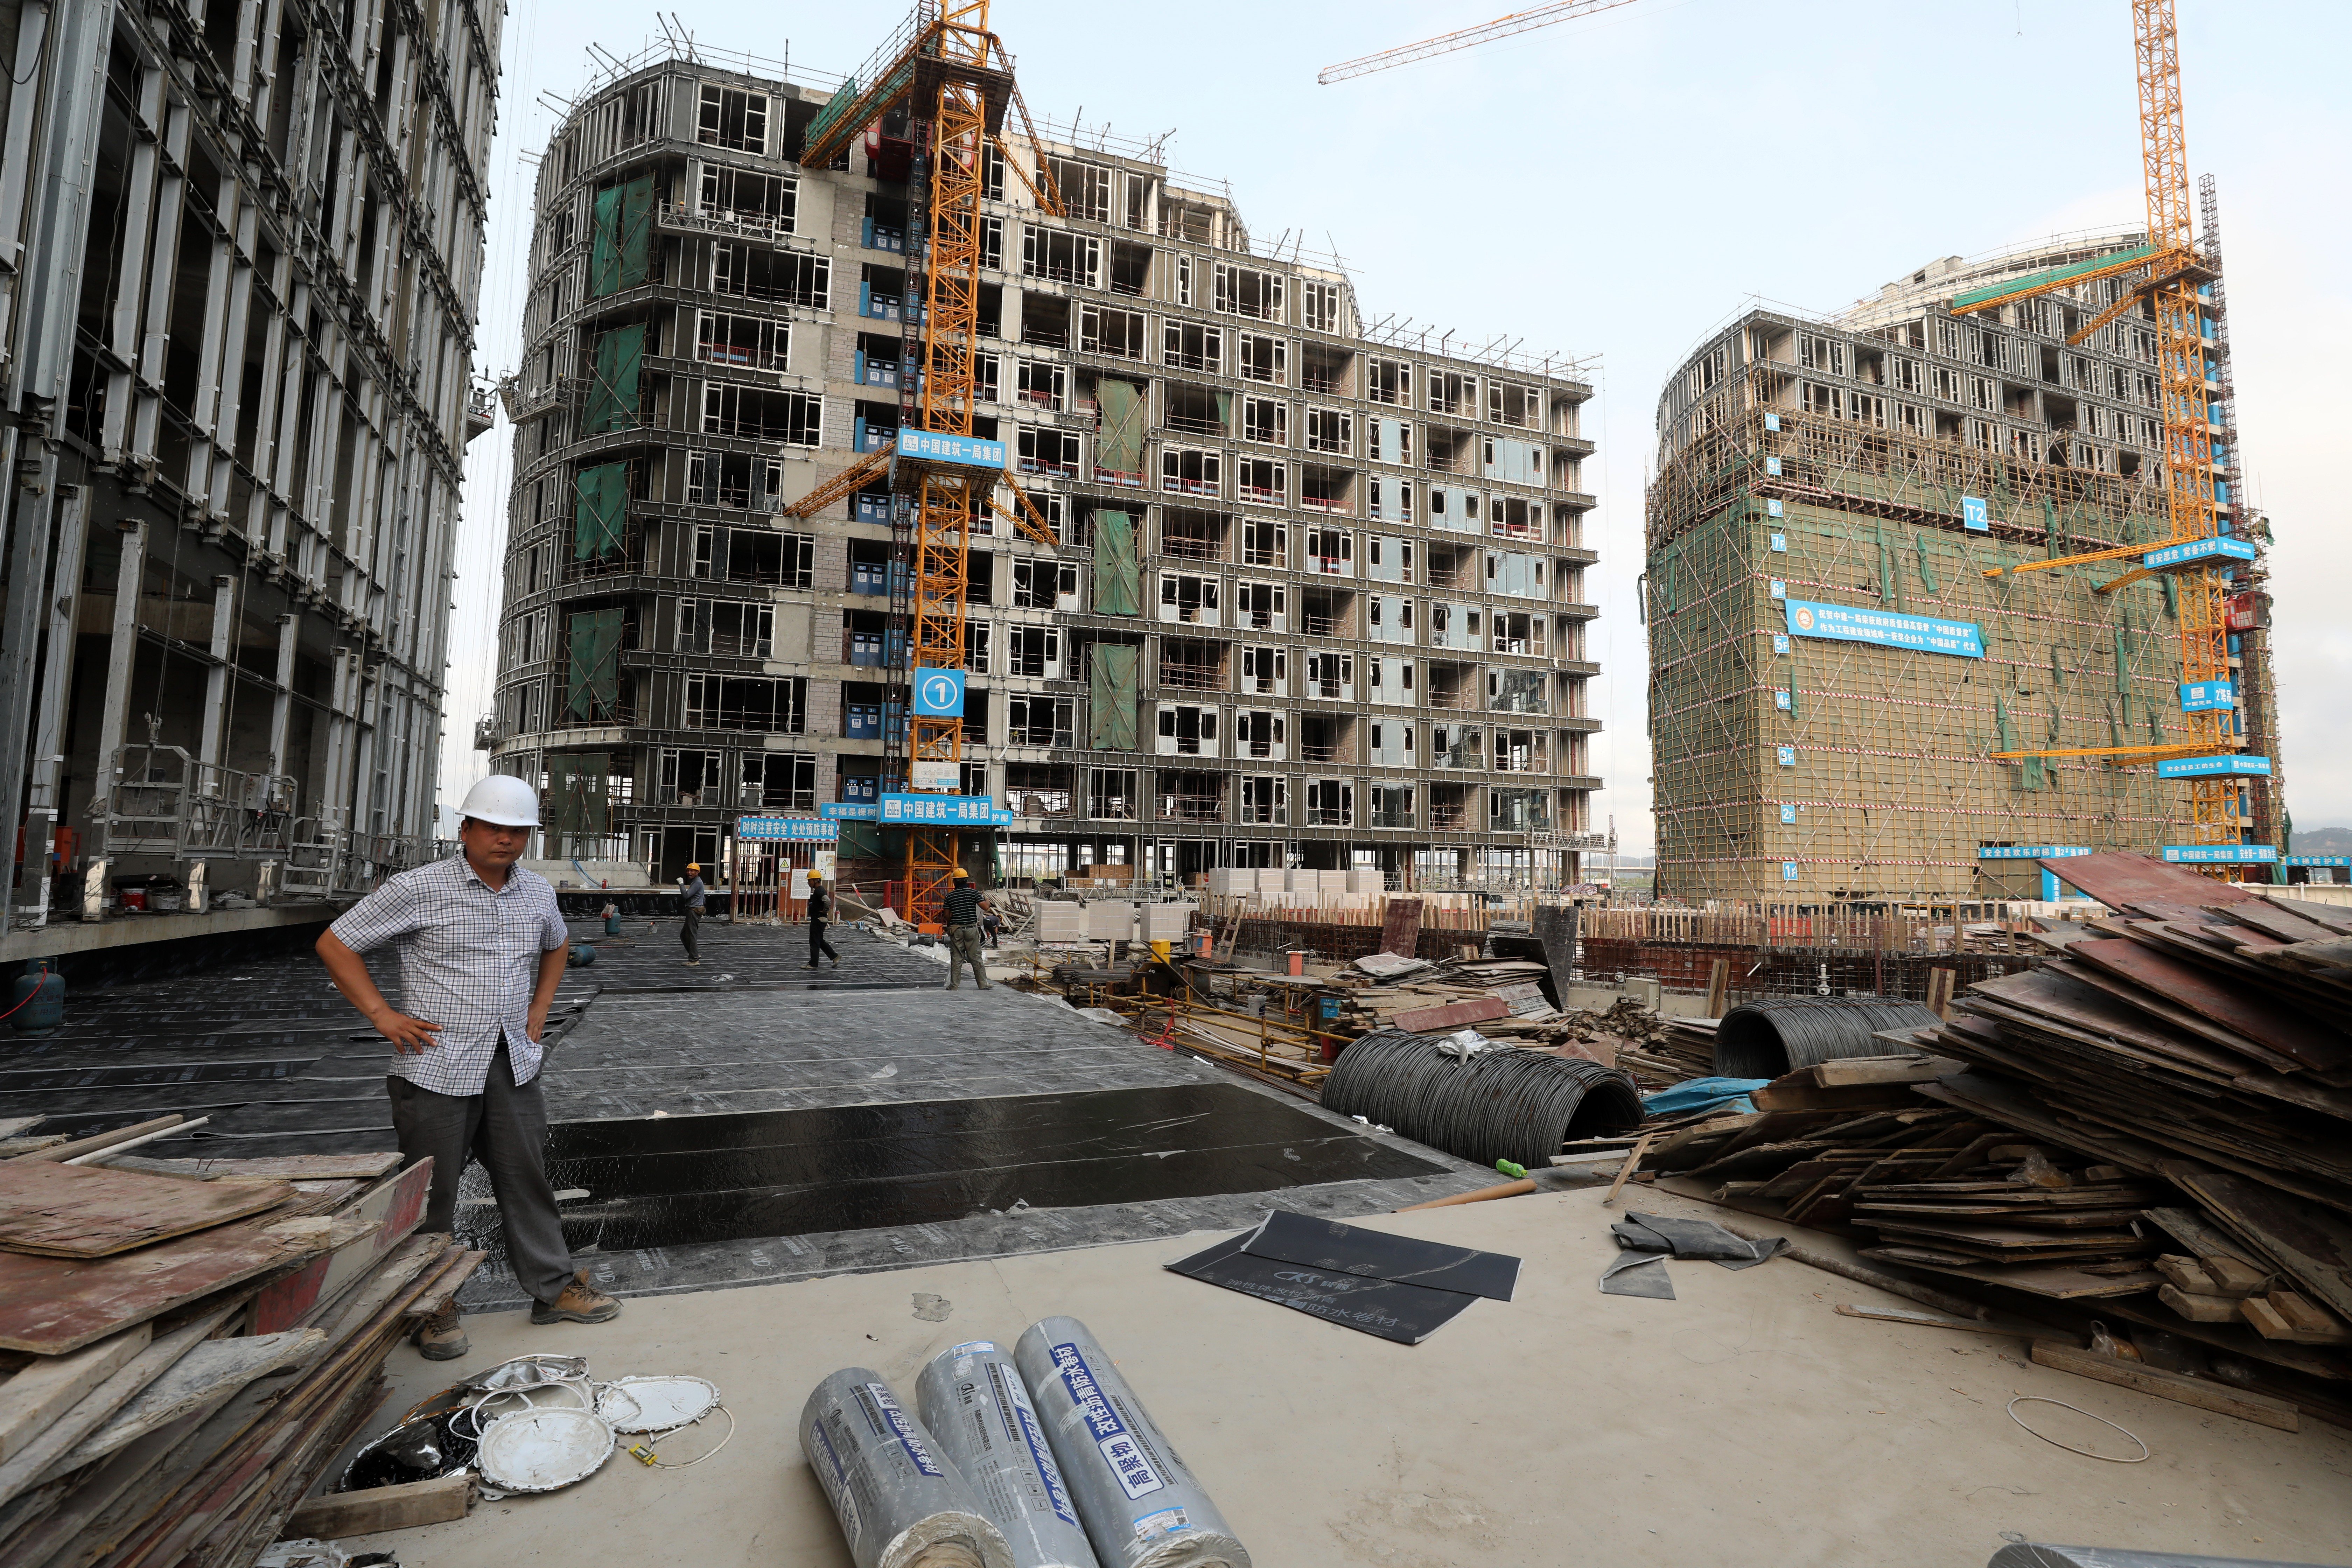 Investment in real estate led the way in China’s first-quarter economic rebound, but overreliance on the sector is a structural issue that needs addressing through reforms. Photo: Dickson Lee